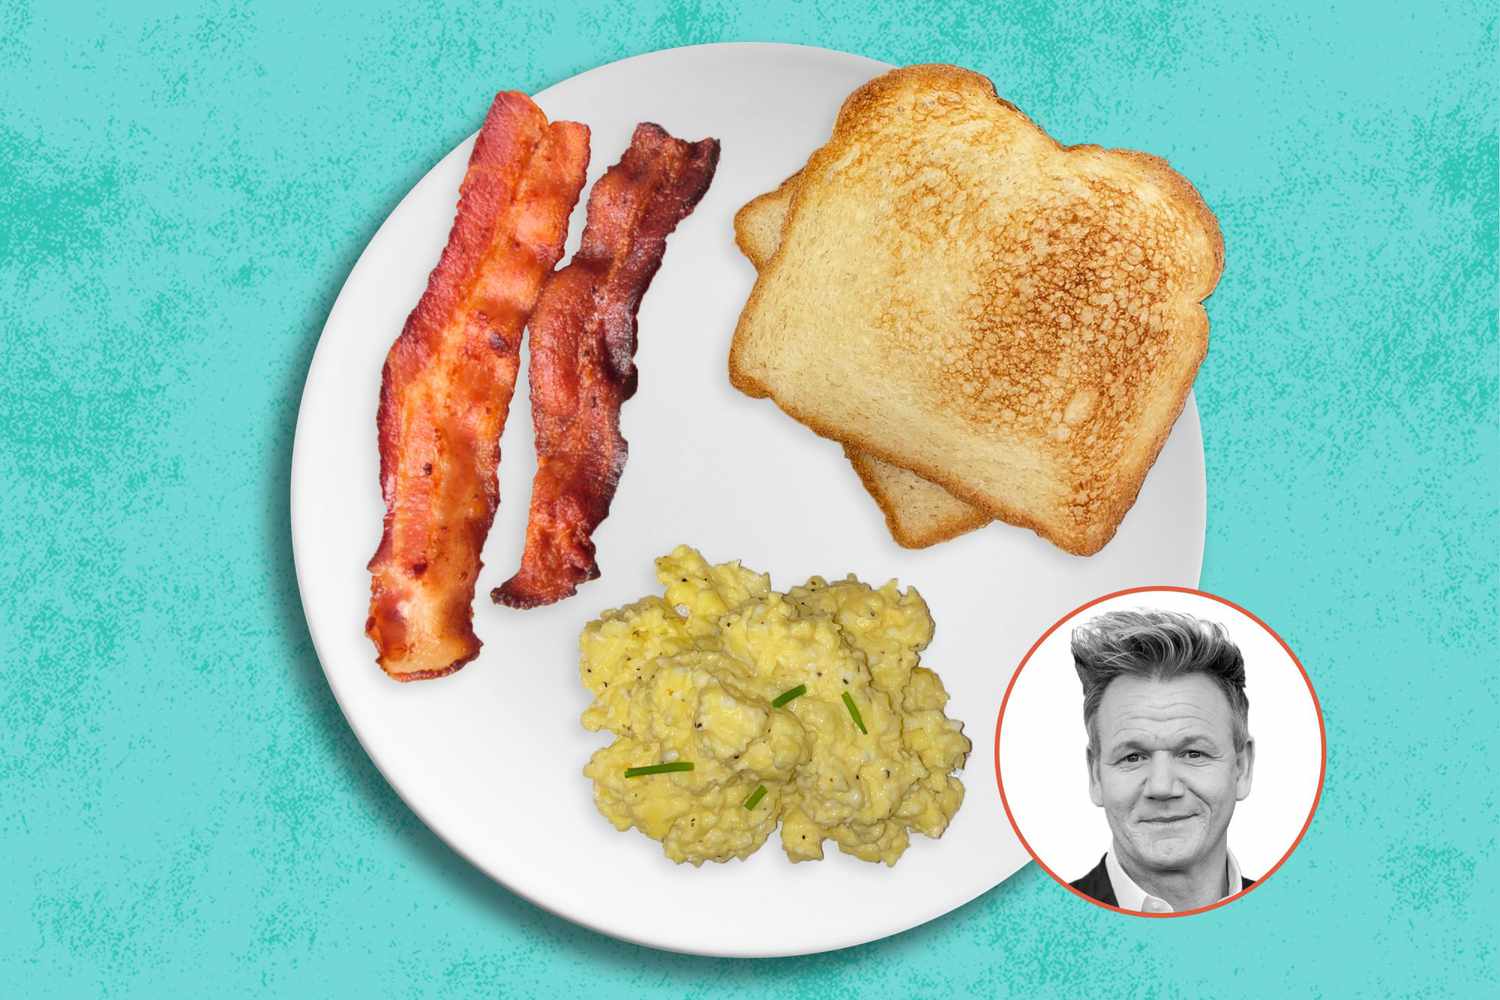 plate of scrambled eggs, bacon, and toast with Gordon Ramsay's face